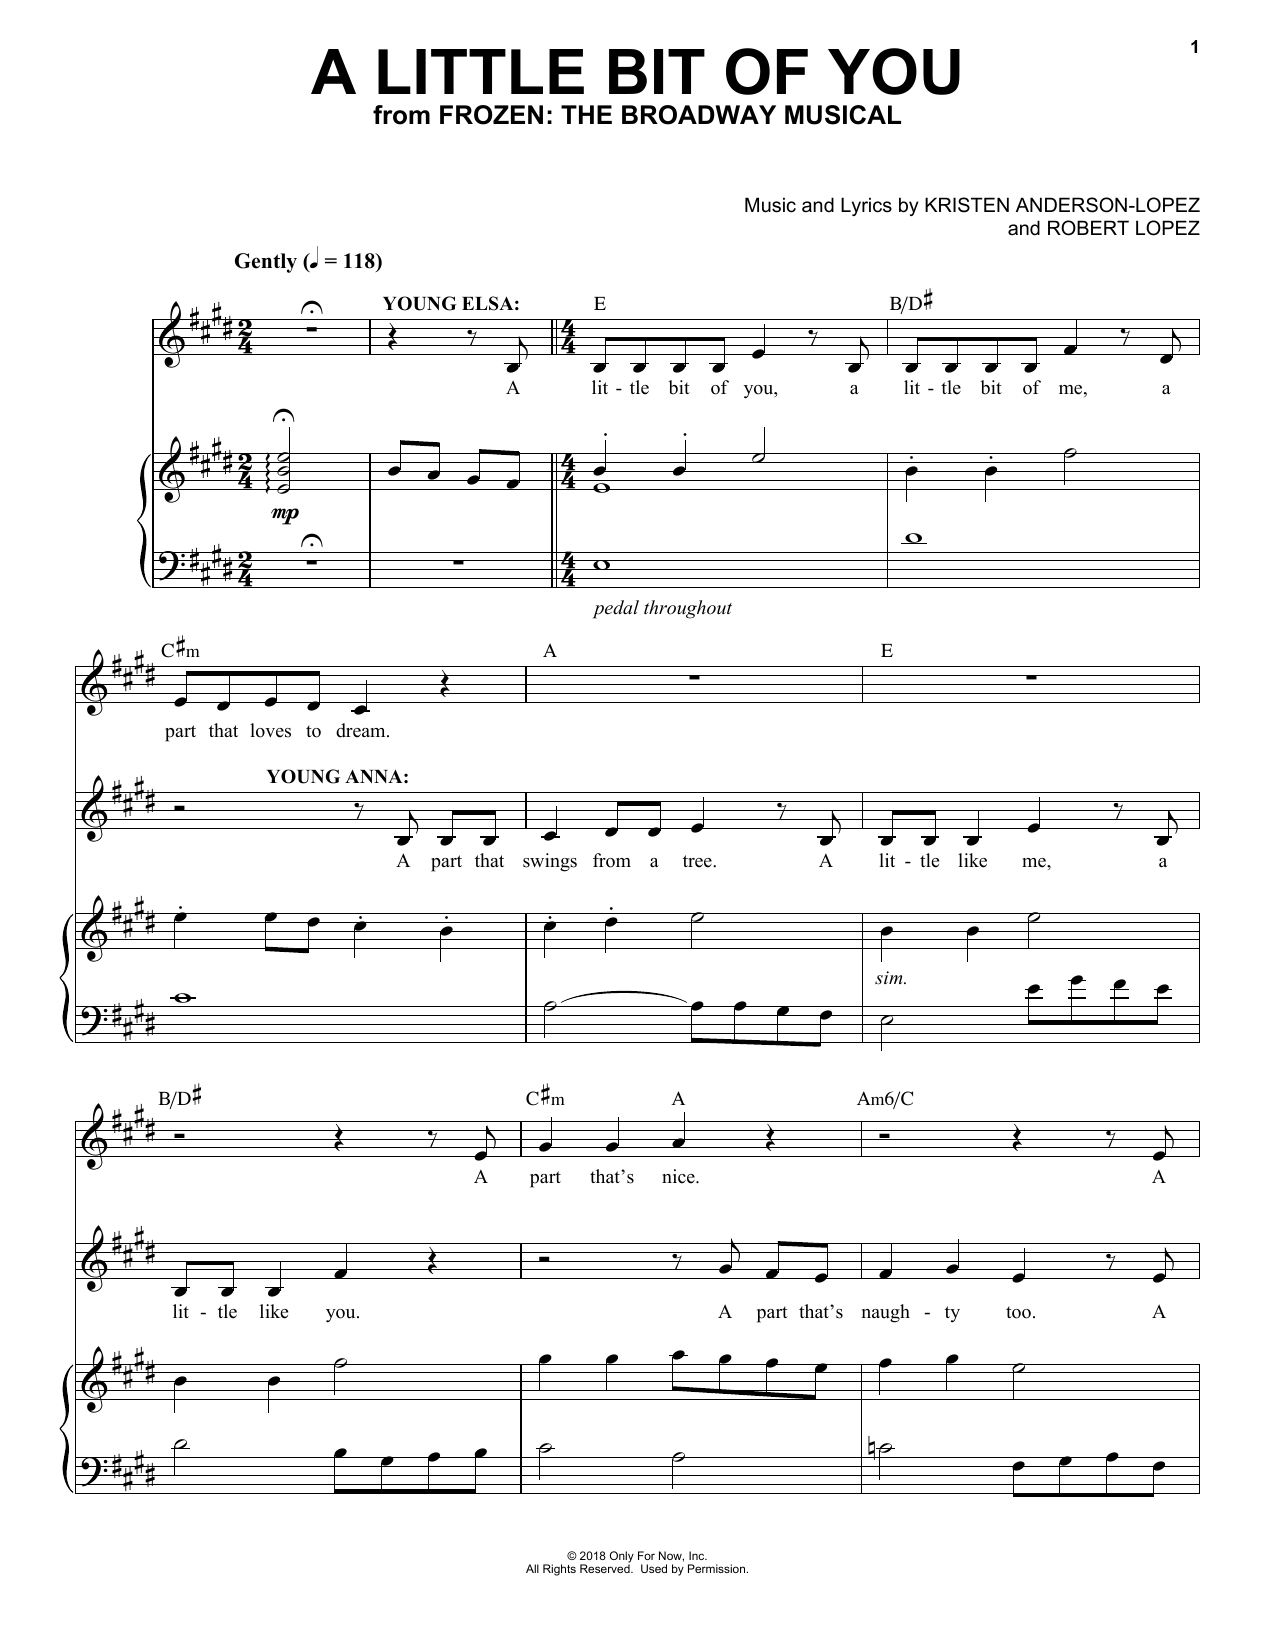 Download Kristen Anderson-Lopez & Robert Lope A Little Bit Of You (from Frozen: The B Sheet Music